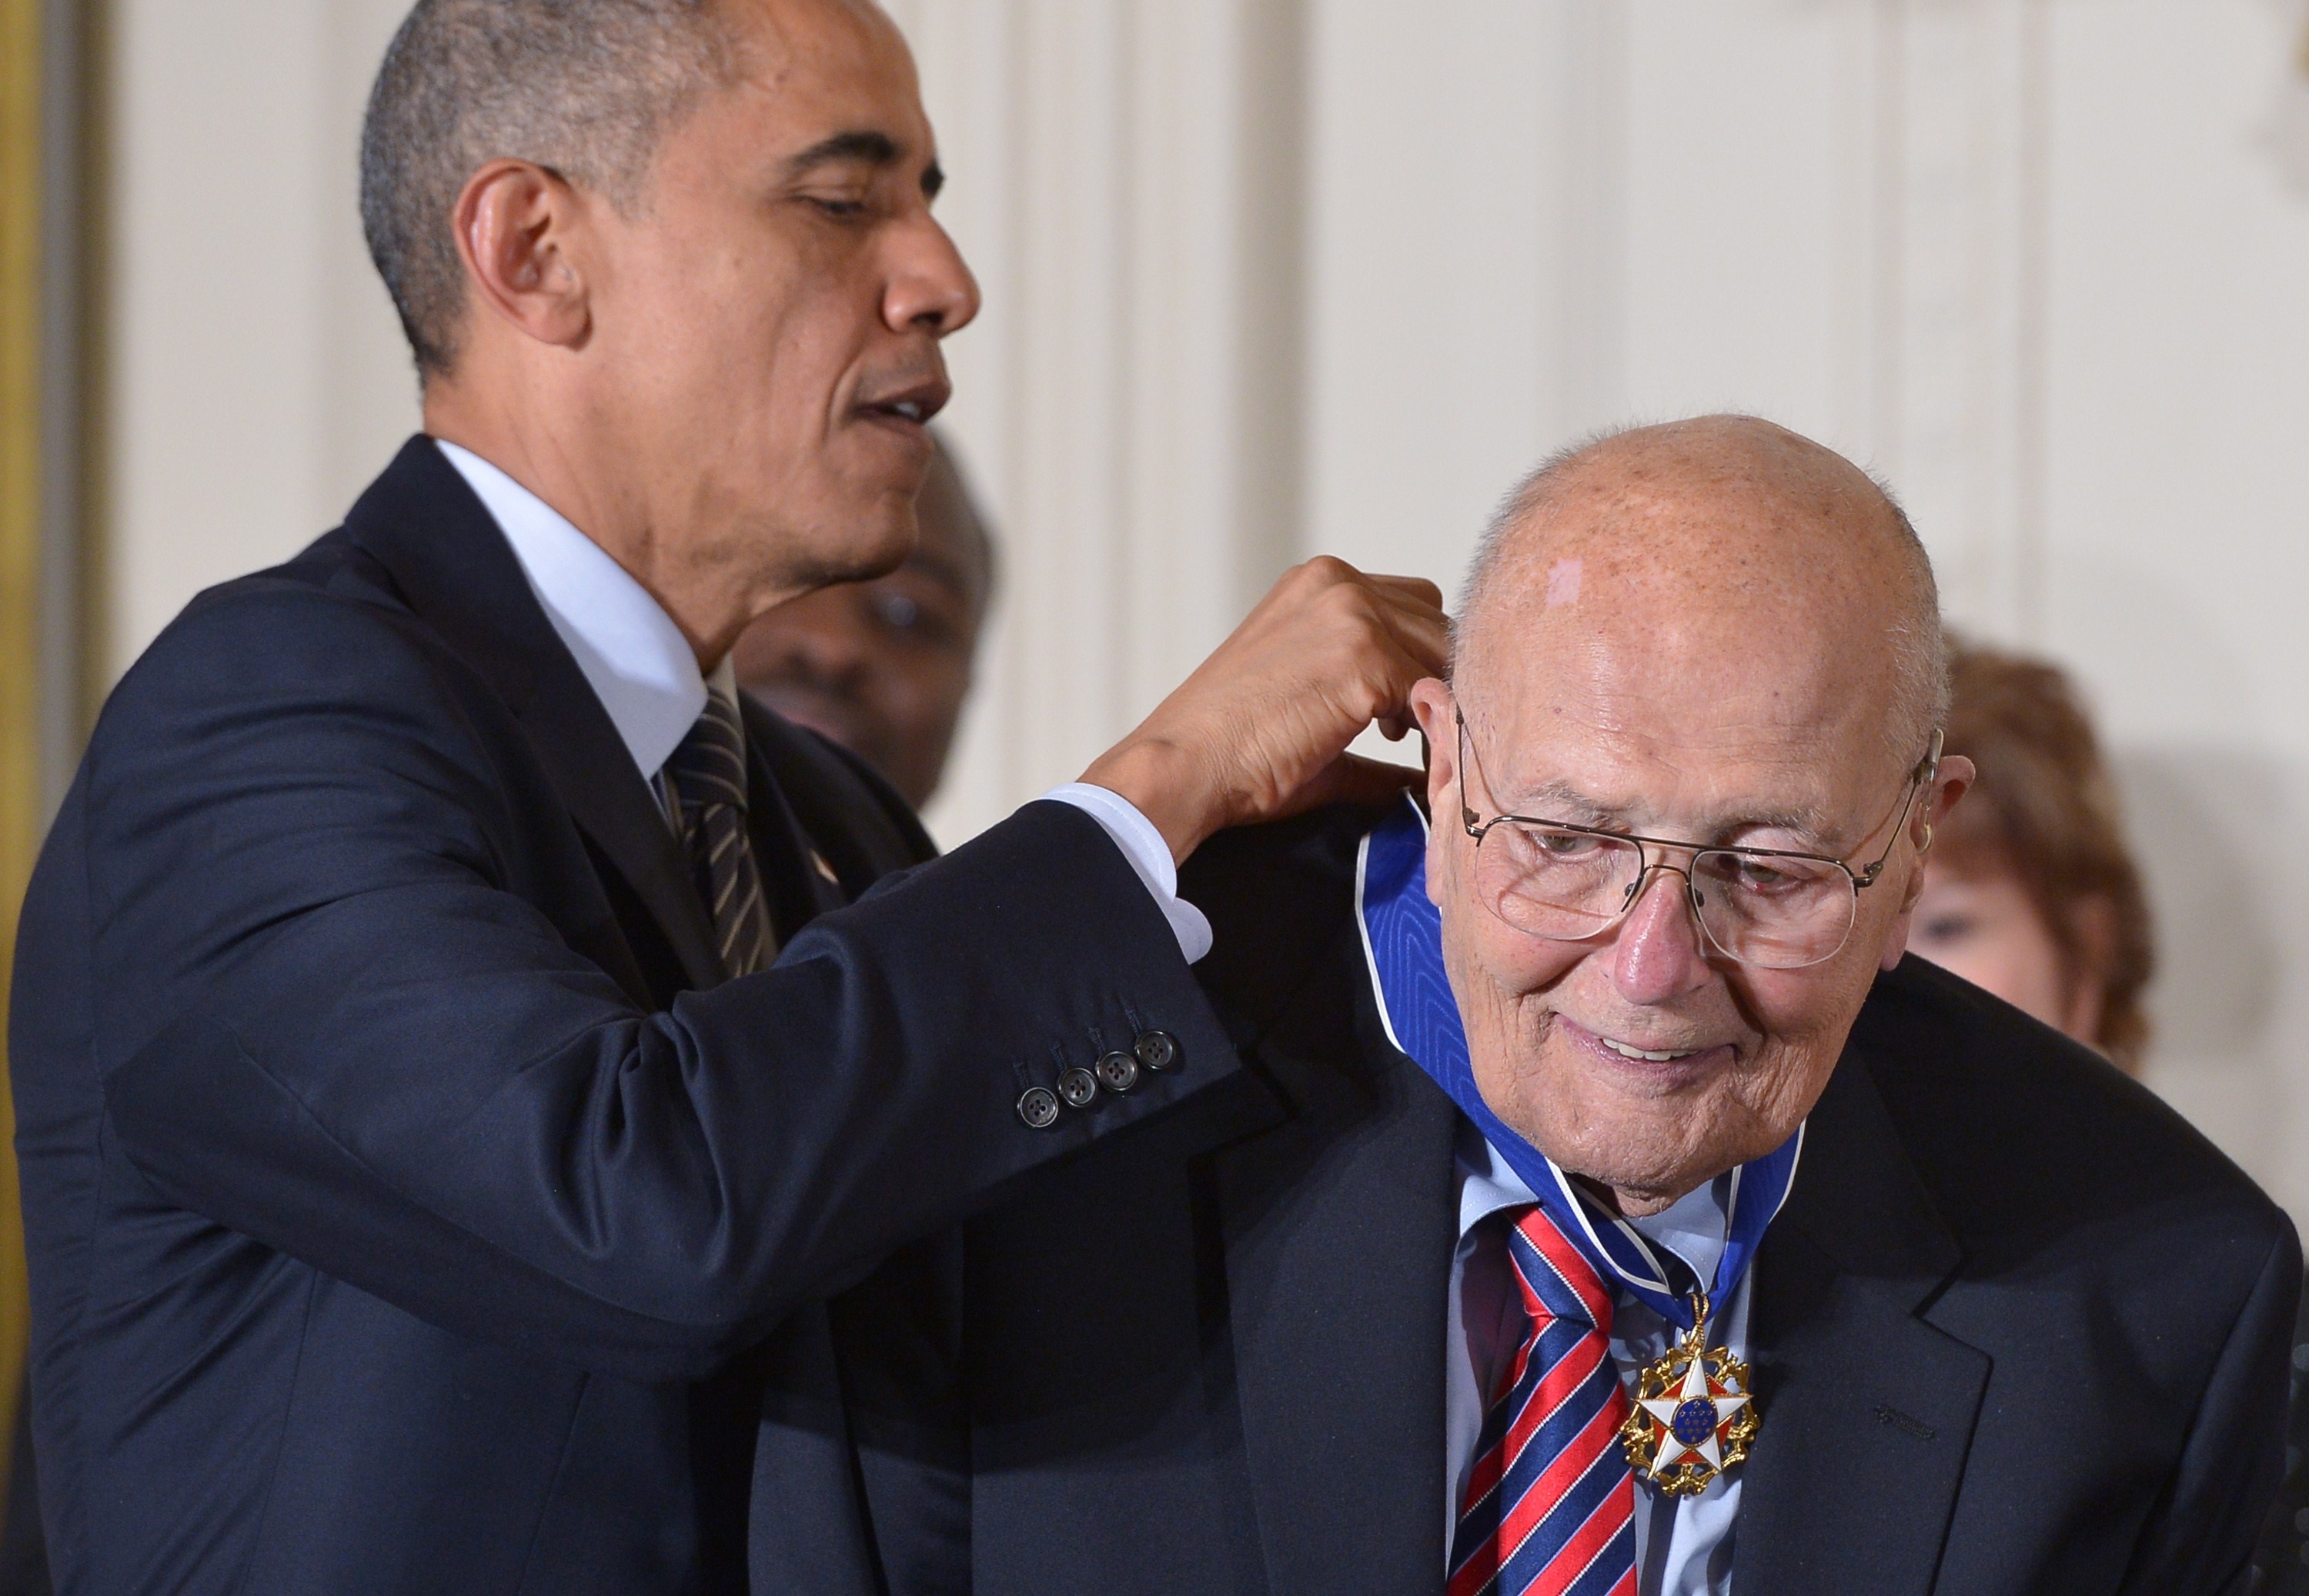 US President Barack Obama presents the Medal of Freedom to Rep. John Dingell (D-MI) during a ceremony in the East Room of the White House on November 24, 2014 in Washington, DC. (MANDEL NGAN/AFP/Getty Images)